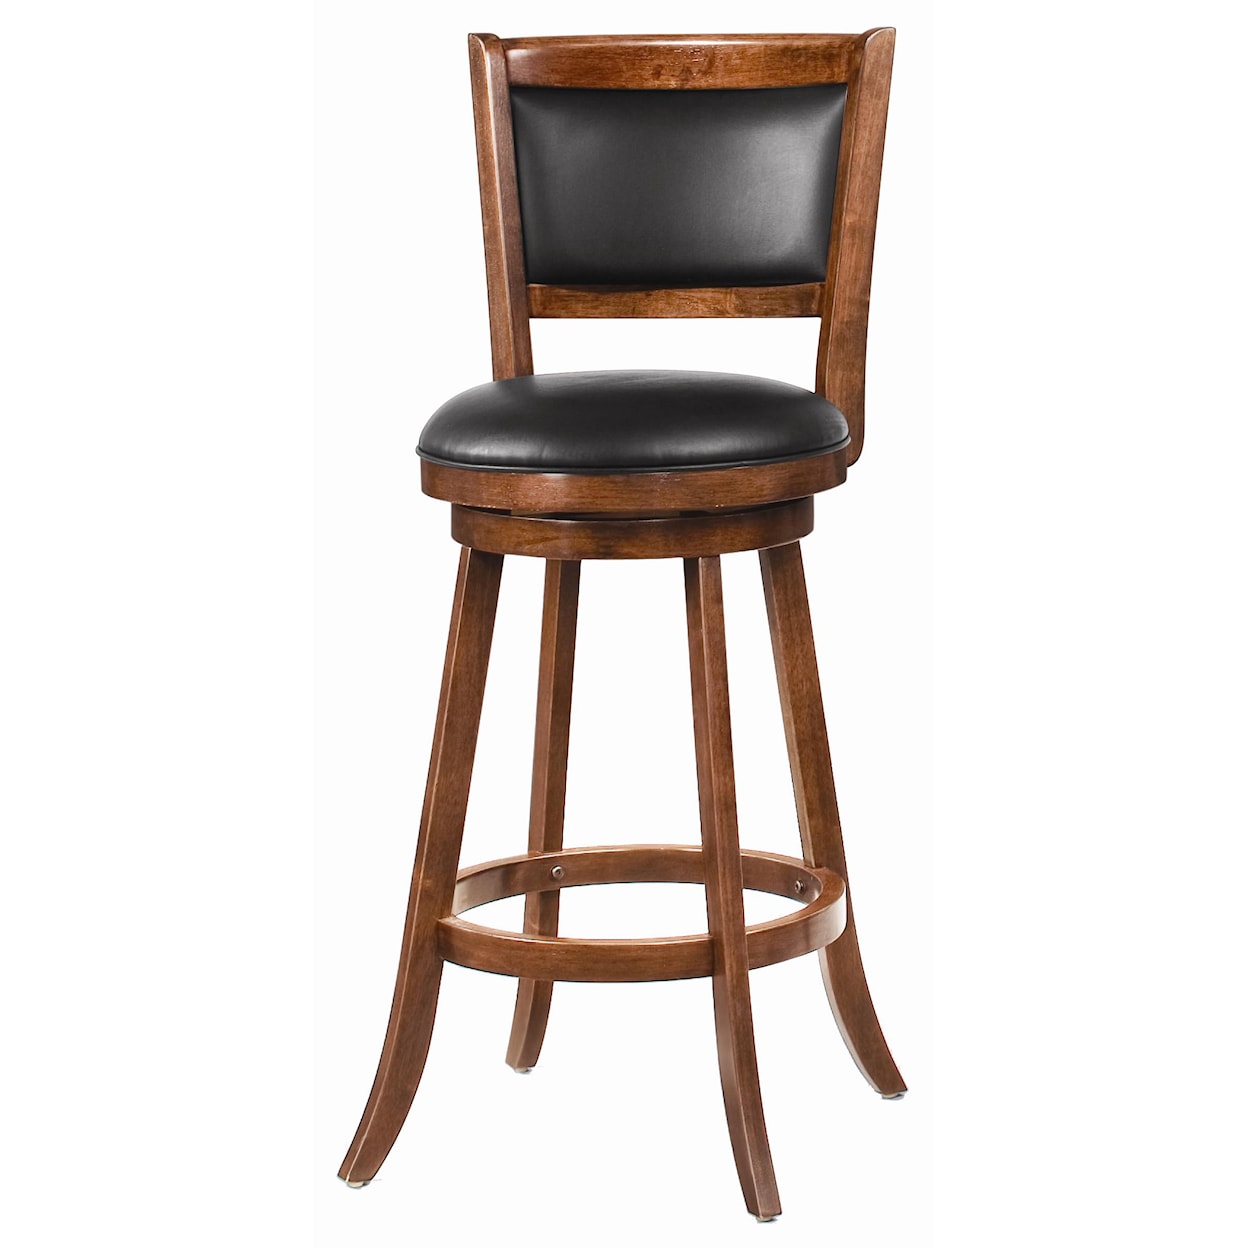 Coaster Dining Chairs and Bar Stools 29" Swivel Bar Stool with Upholstered Seat